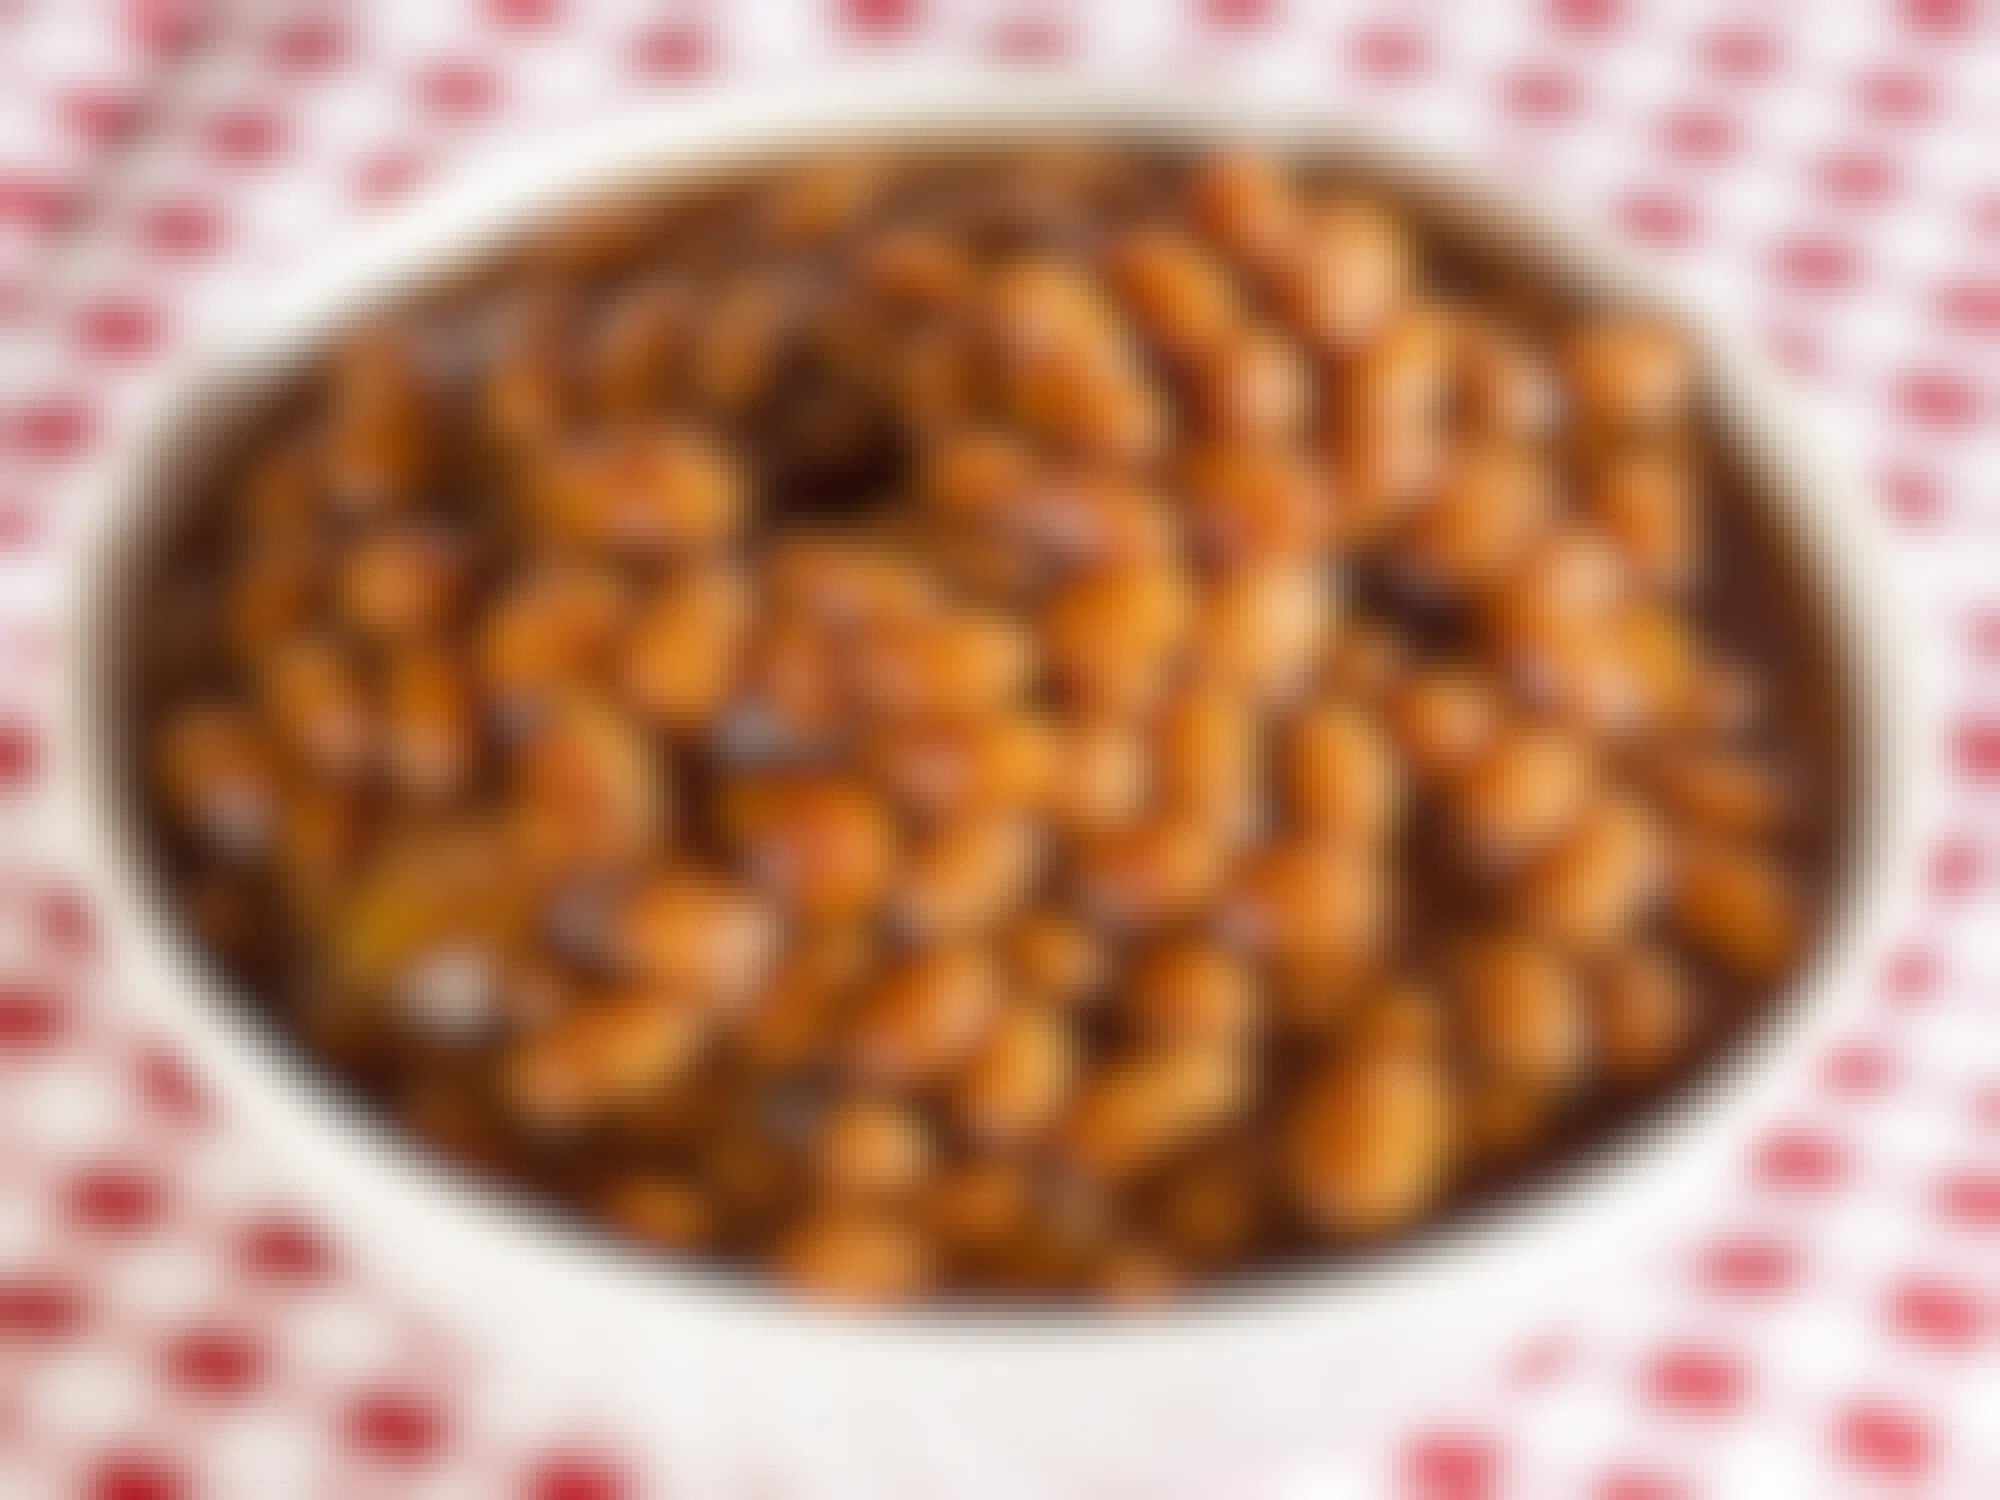 Baked beans in a bowl